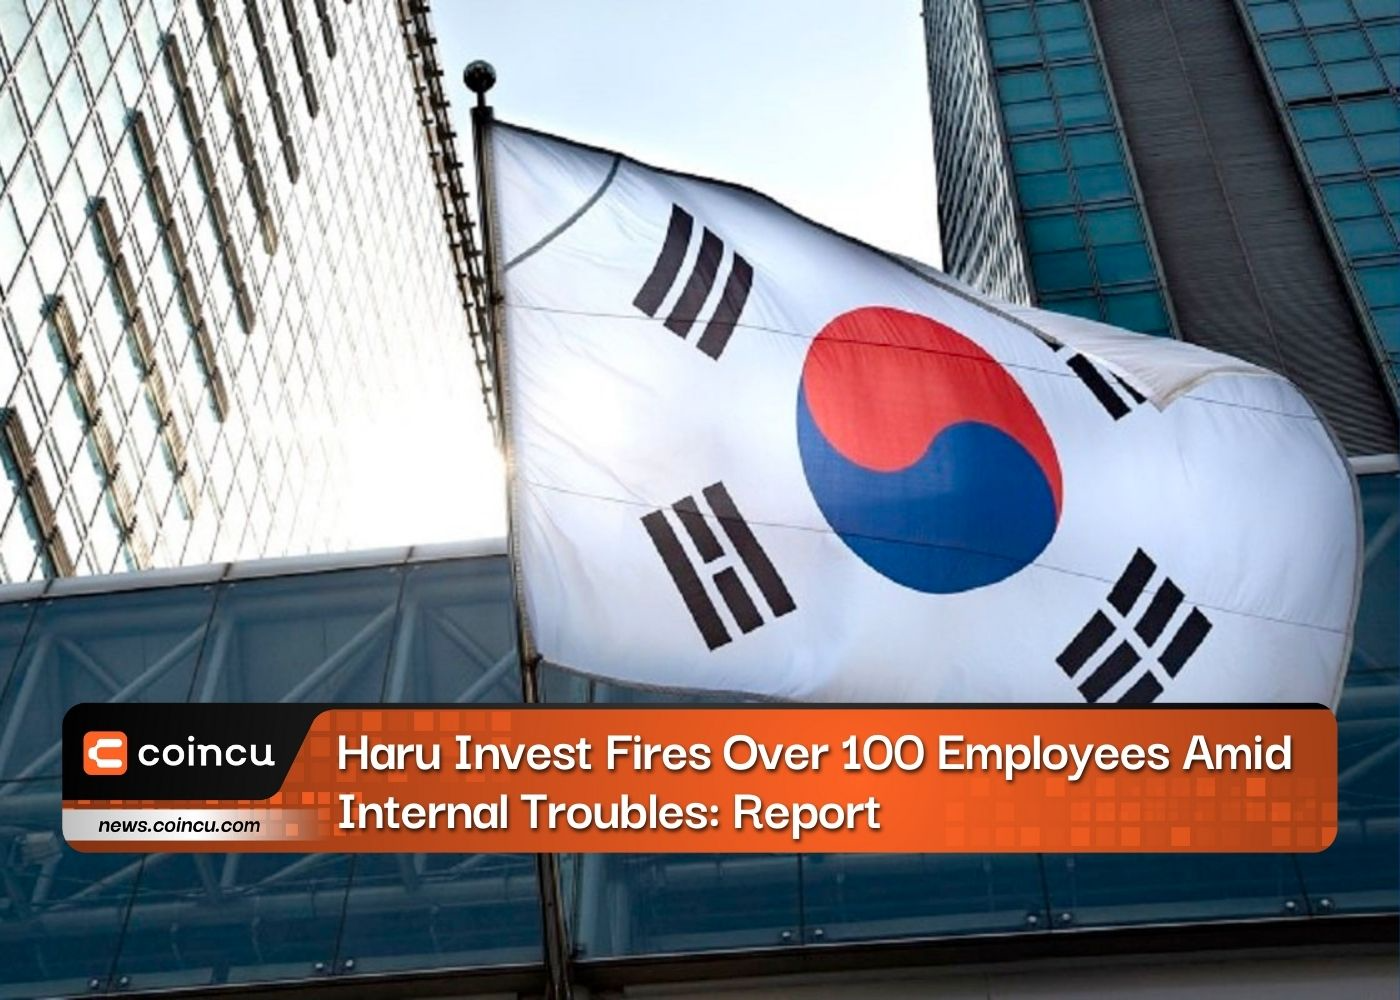 Haru Invest Fires Over 100 Employees Amid Internal Troubles: Report